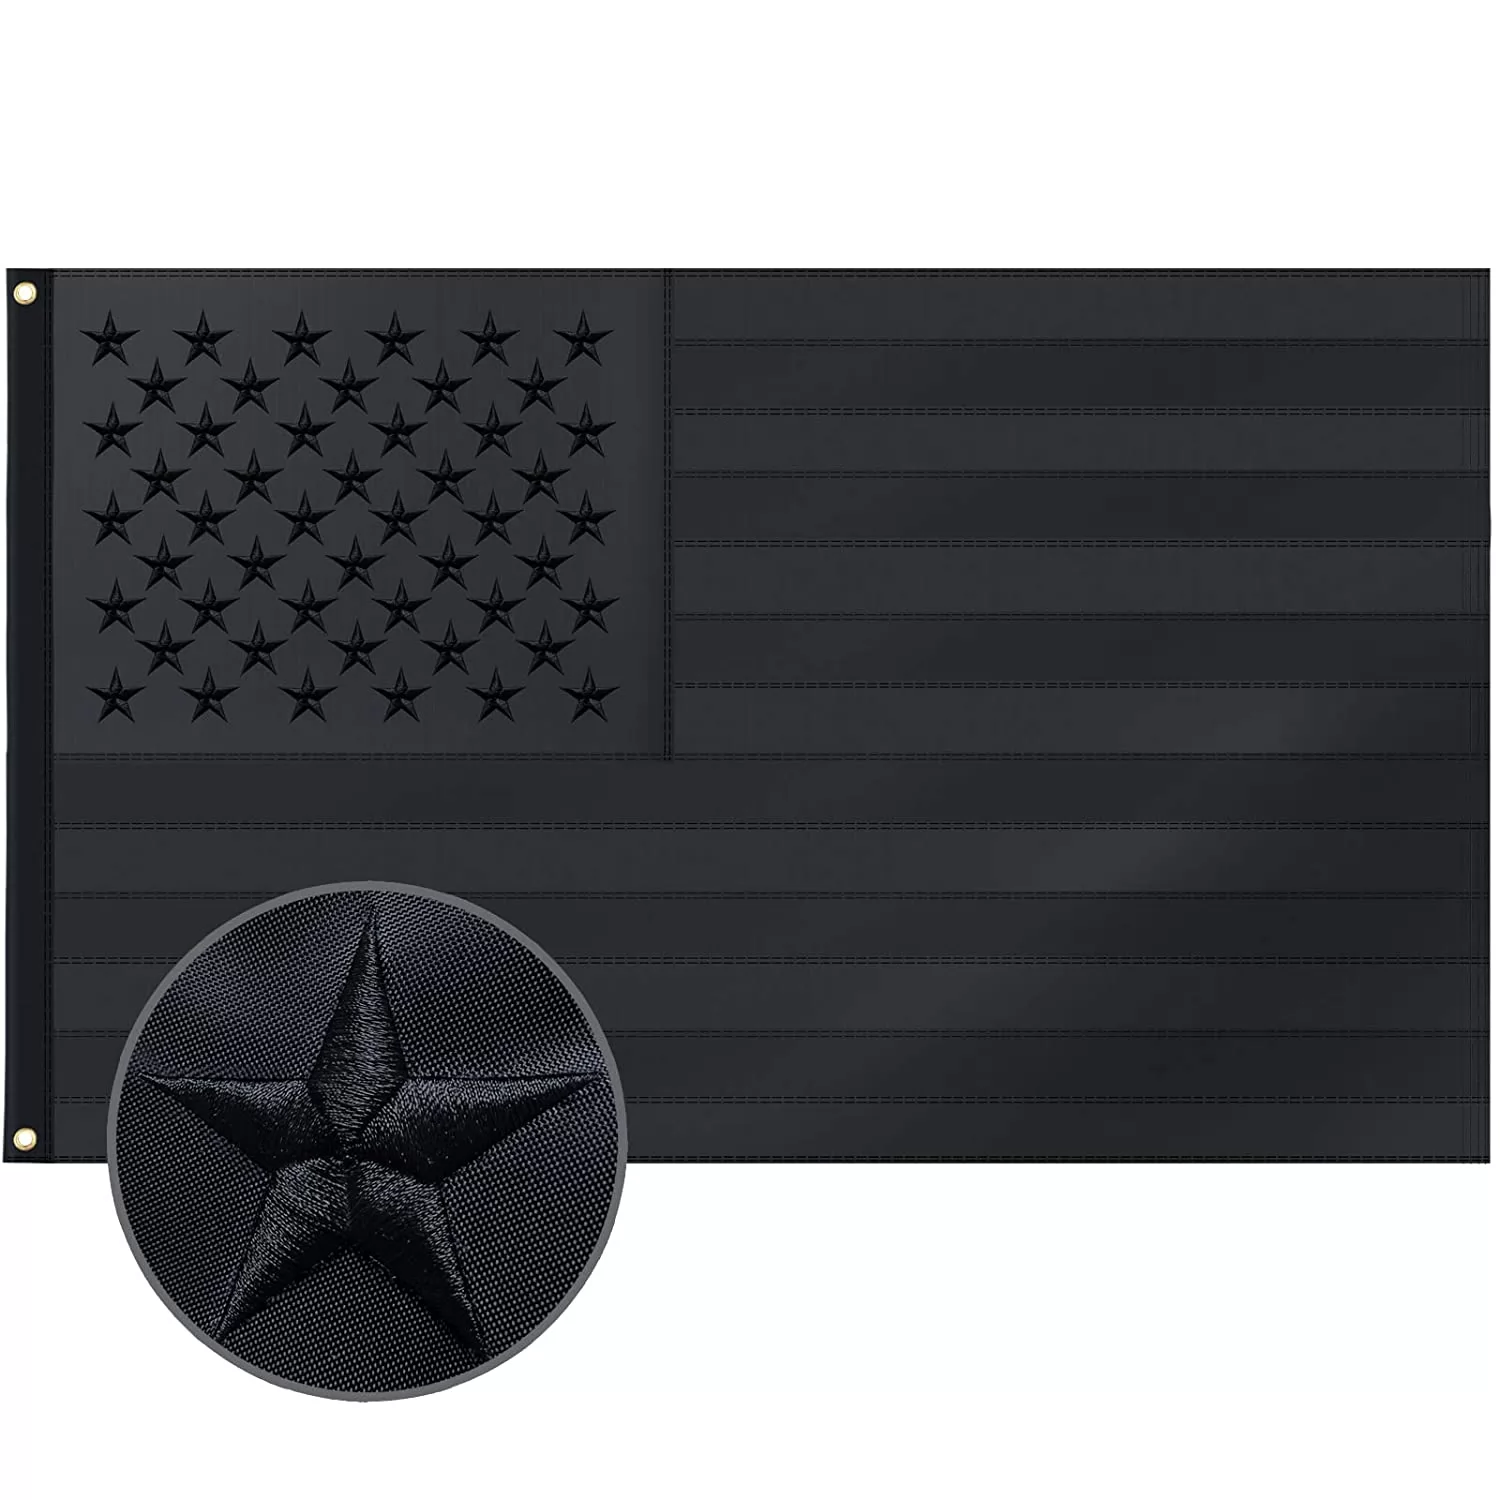 Homissor All Black American Flag 3x5 Ft US Flag, Embroidered Stars, Sewn Stripes, Brass Grommets Heavy Duty 220D Nylon USA Flags for Outdoor Blackout 